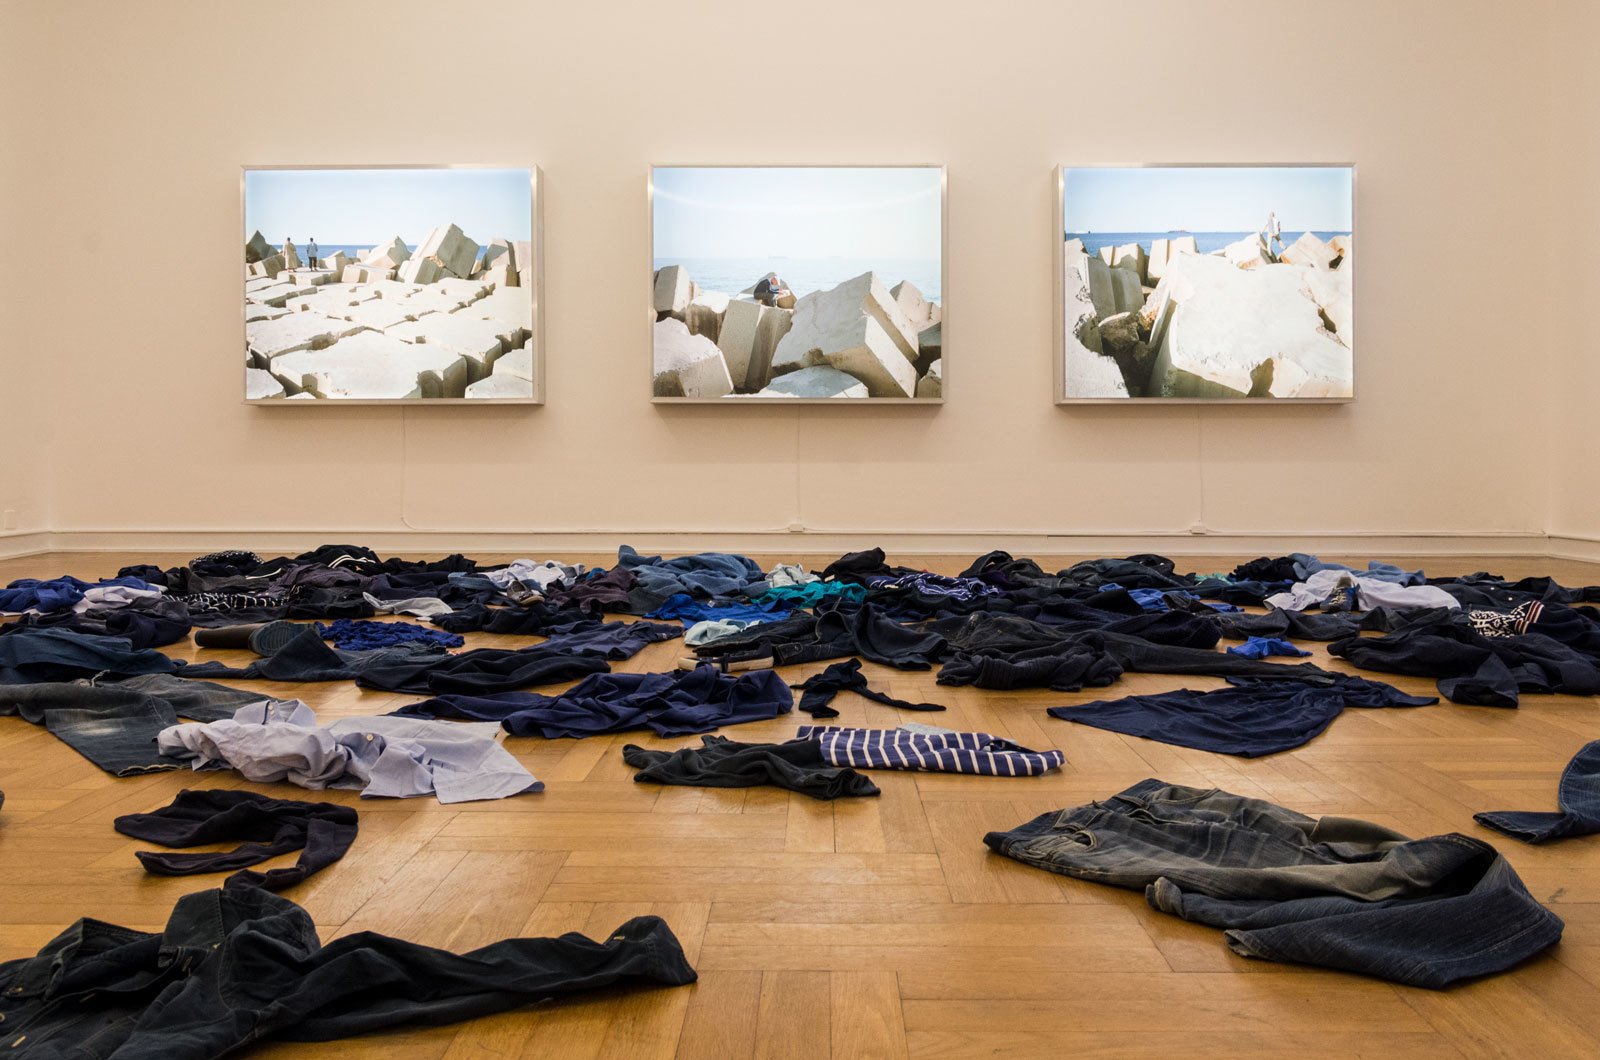 Kader Attia La Mer Morte, 2015 Installation. Clothes and 3 lightboxes, each 130 &times; 160 &times; 18 cmExhibition view, Against the Current: Journey into the Unknown, Museum Schloss Morsbroich, Leverkusen, 2018Photo: Riccardo FranchellucciCourtesy of the artist